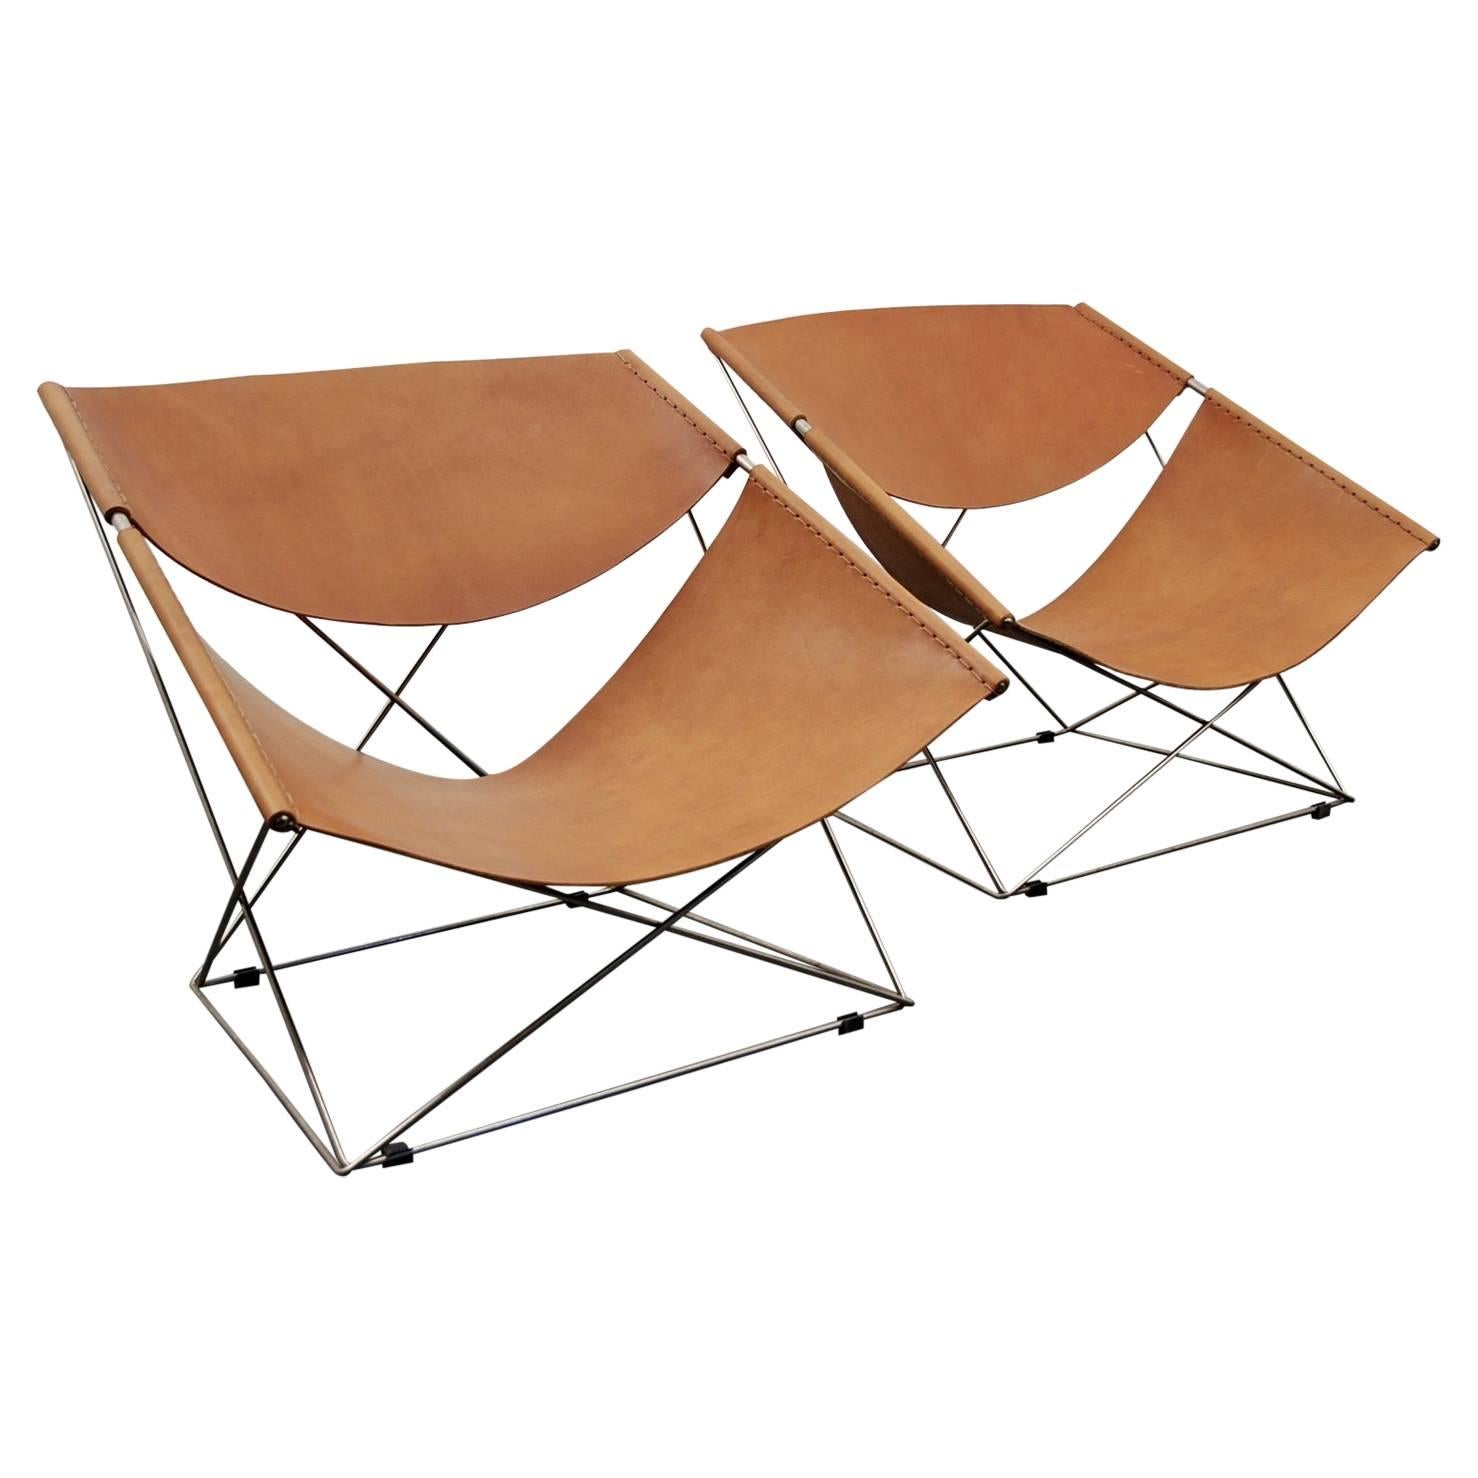 Pierre Paulin "Butterfly" Pair of Seats For Sale